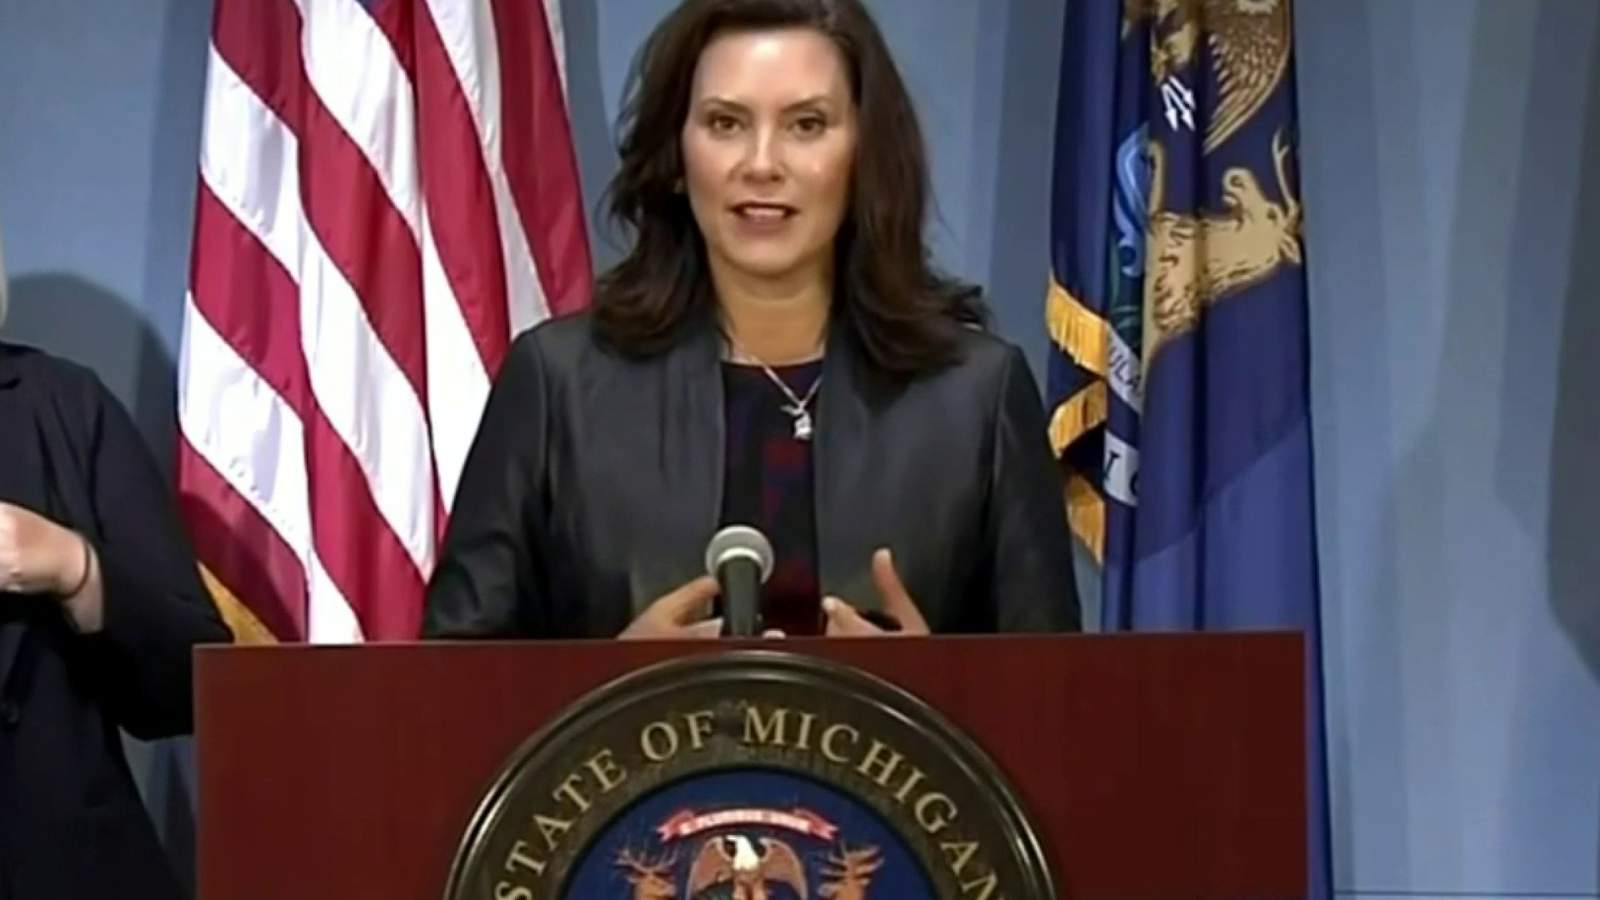 We have to get this right: Gov. Whitmer hints at plan for Michigan gyms, bowling alleys, theaters